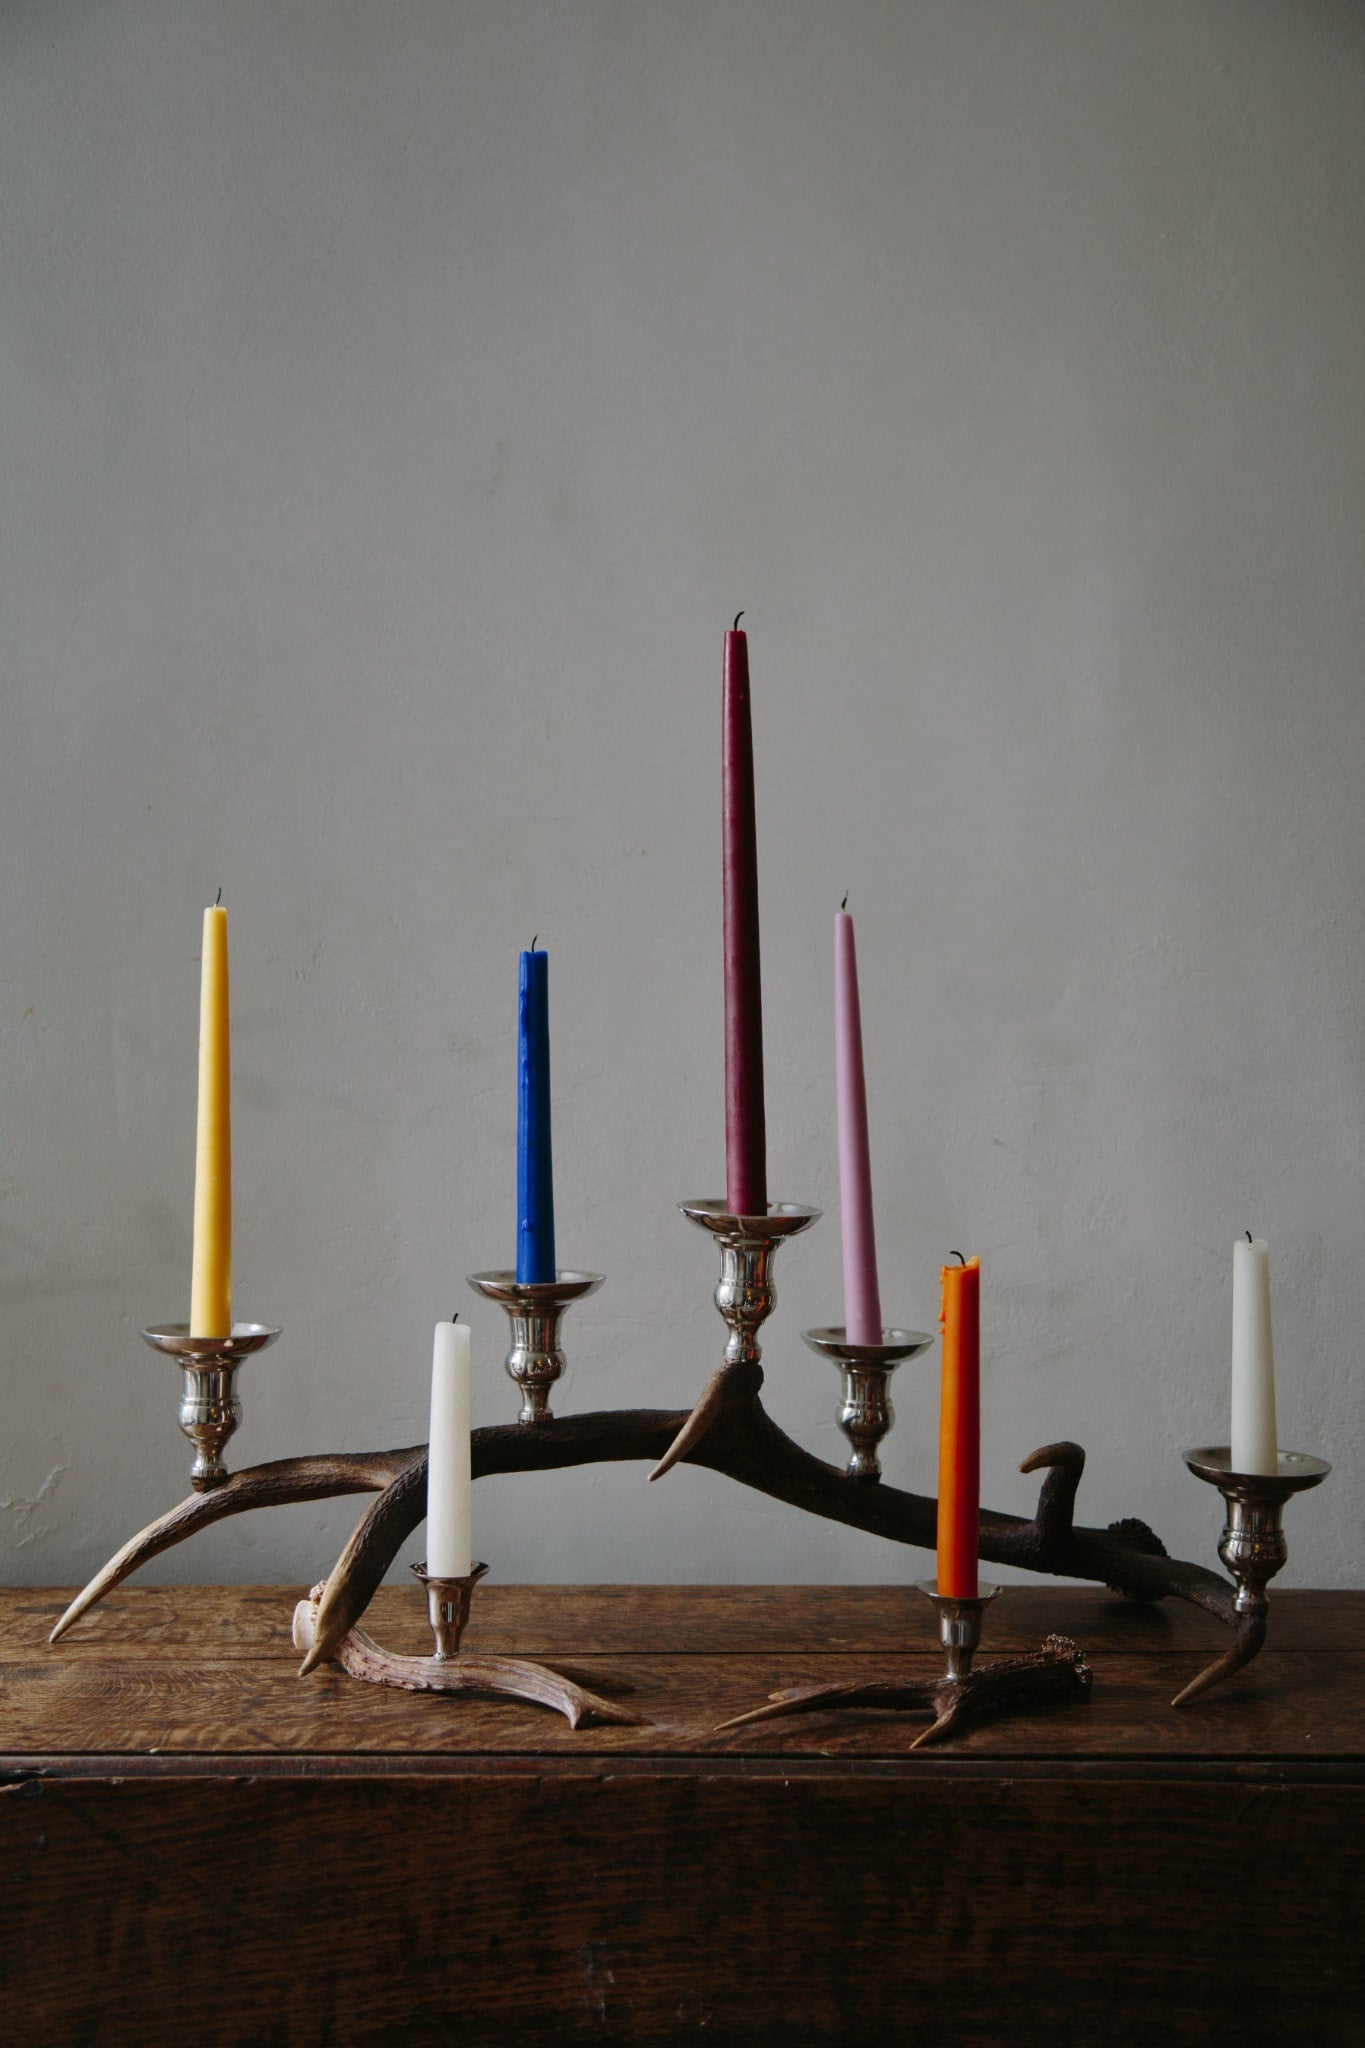 A display of candlesticks and candelabras on a wooden table top. Styled with colourful candles.